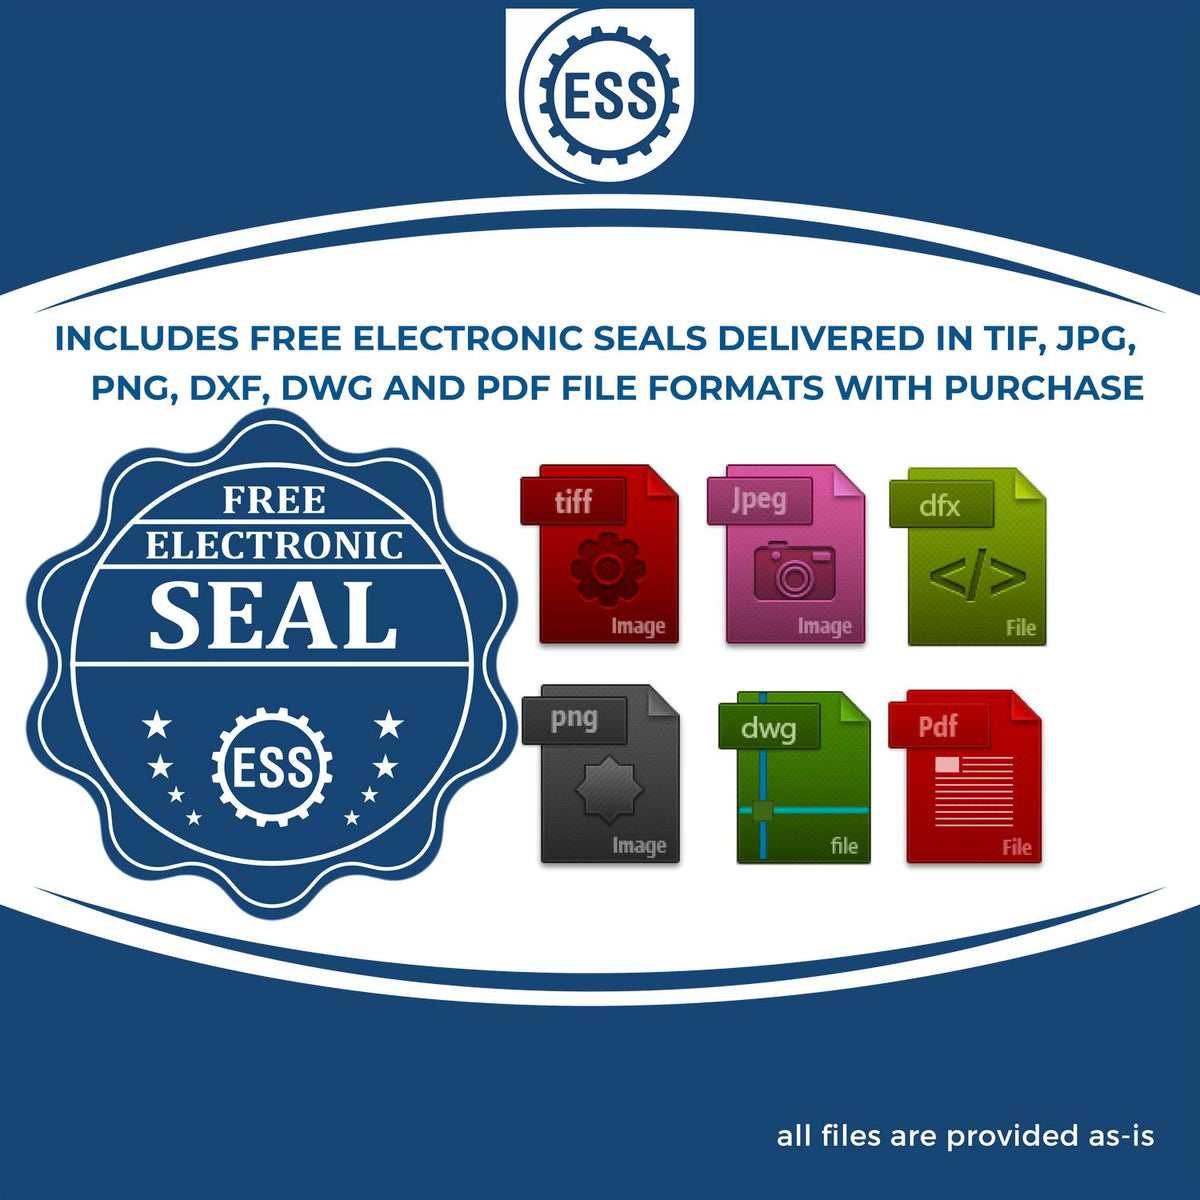 An infographic for the free electronic seal for the Heavy Duty Cast Iron Iowa Geologist Seal Embosser illustrating the different file type icons such as DXF, DWG, TIF, JPG and PNG.